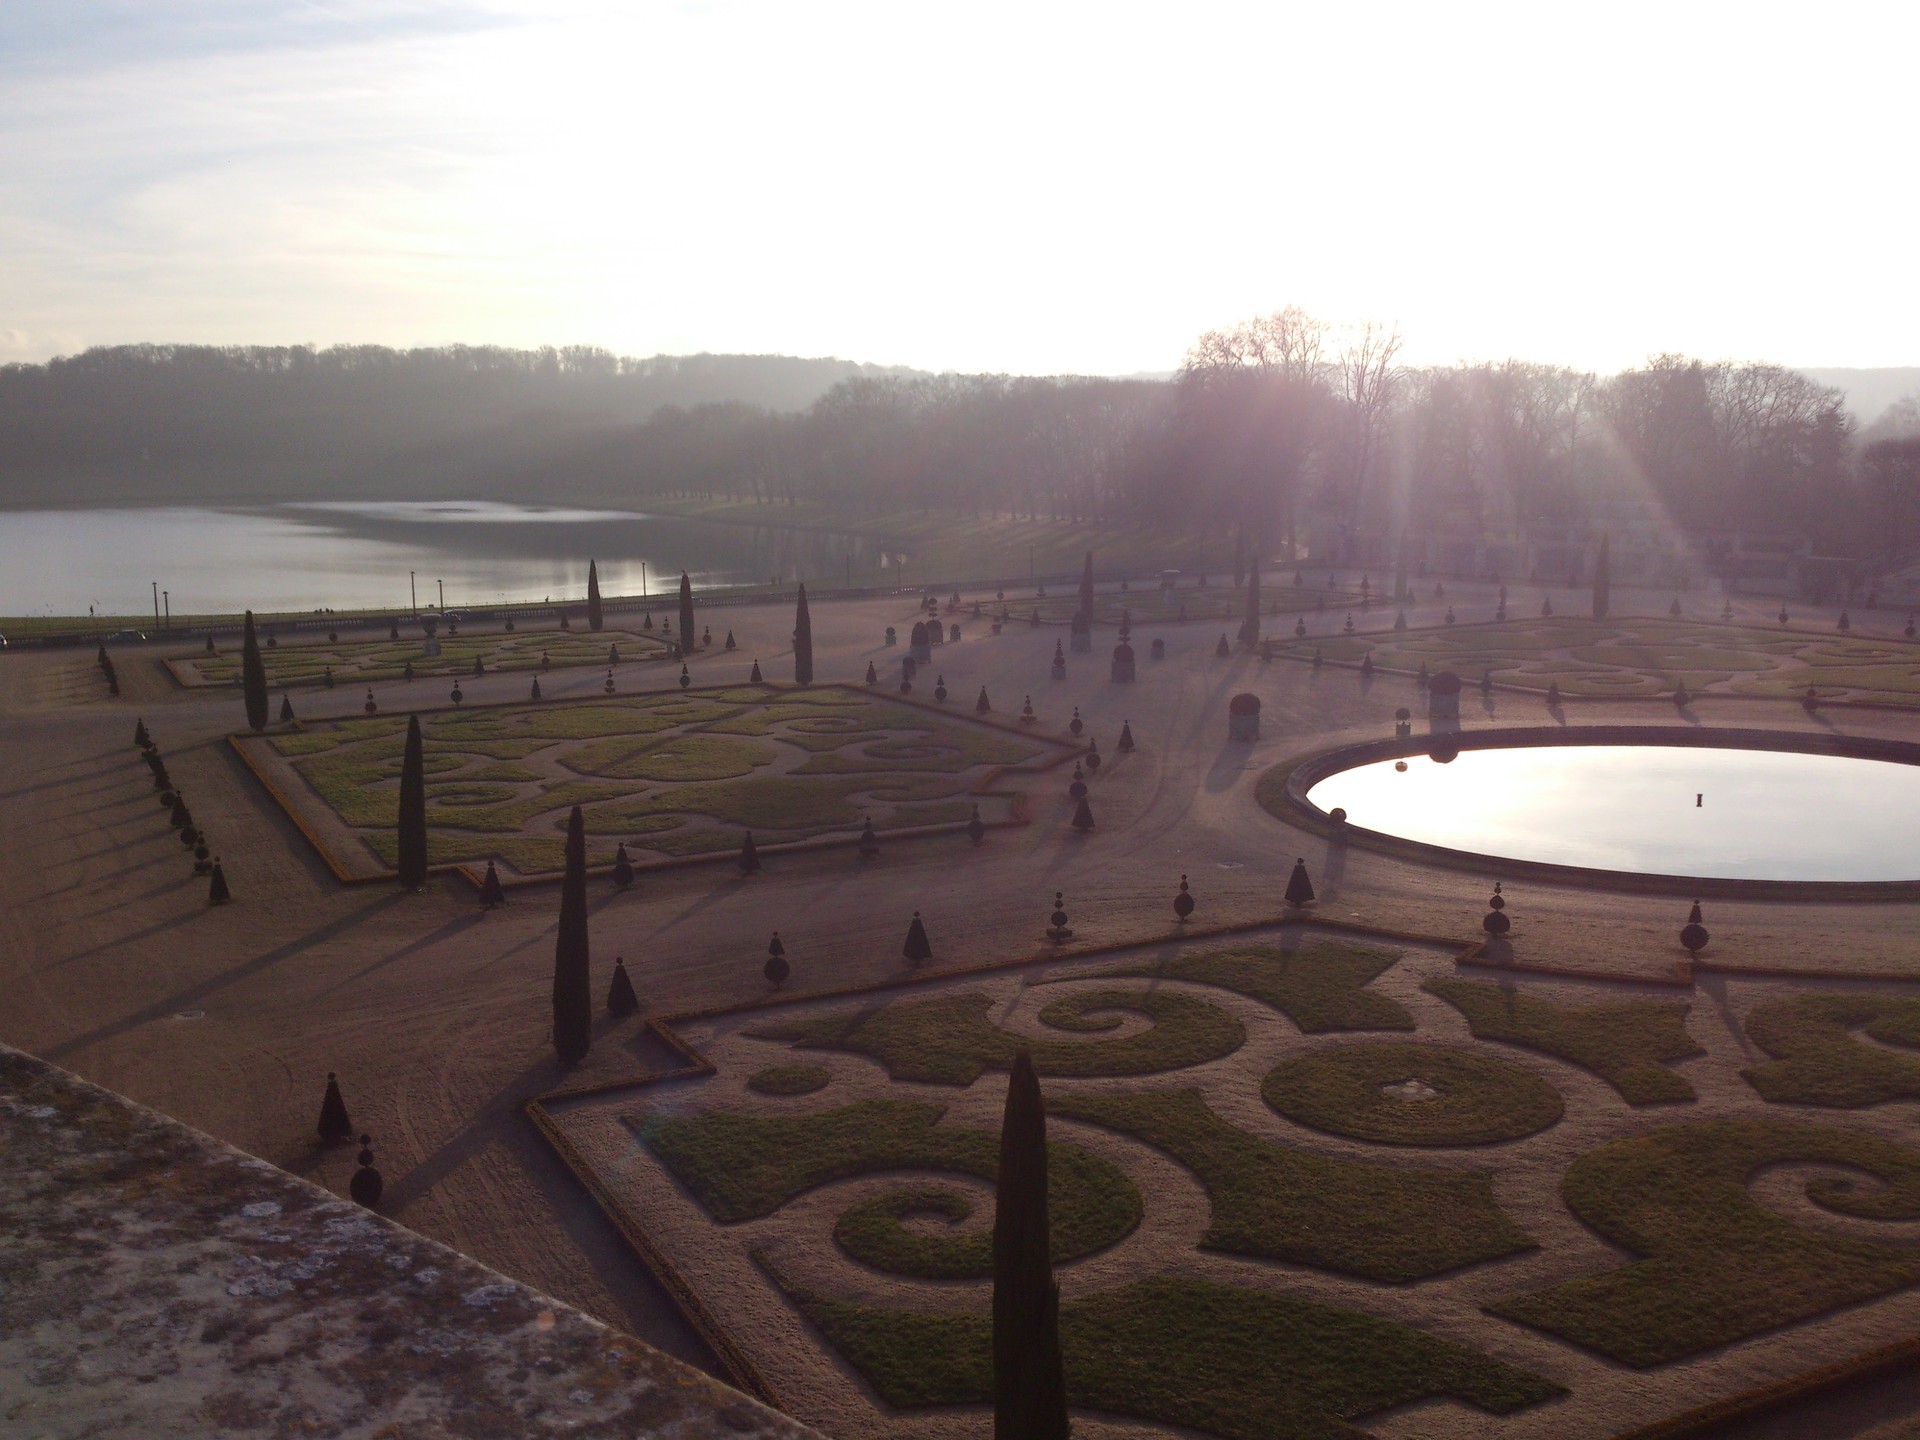 Experience the Palace of Versailles